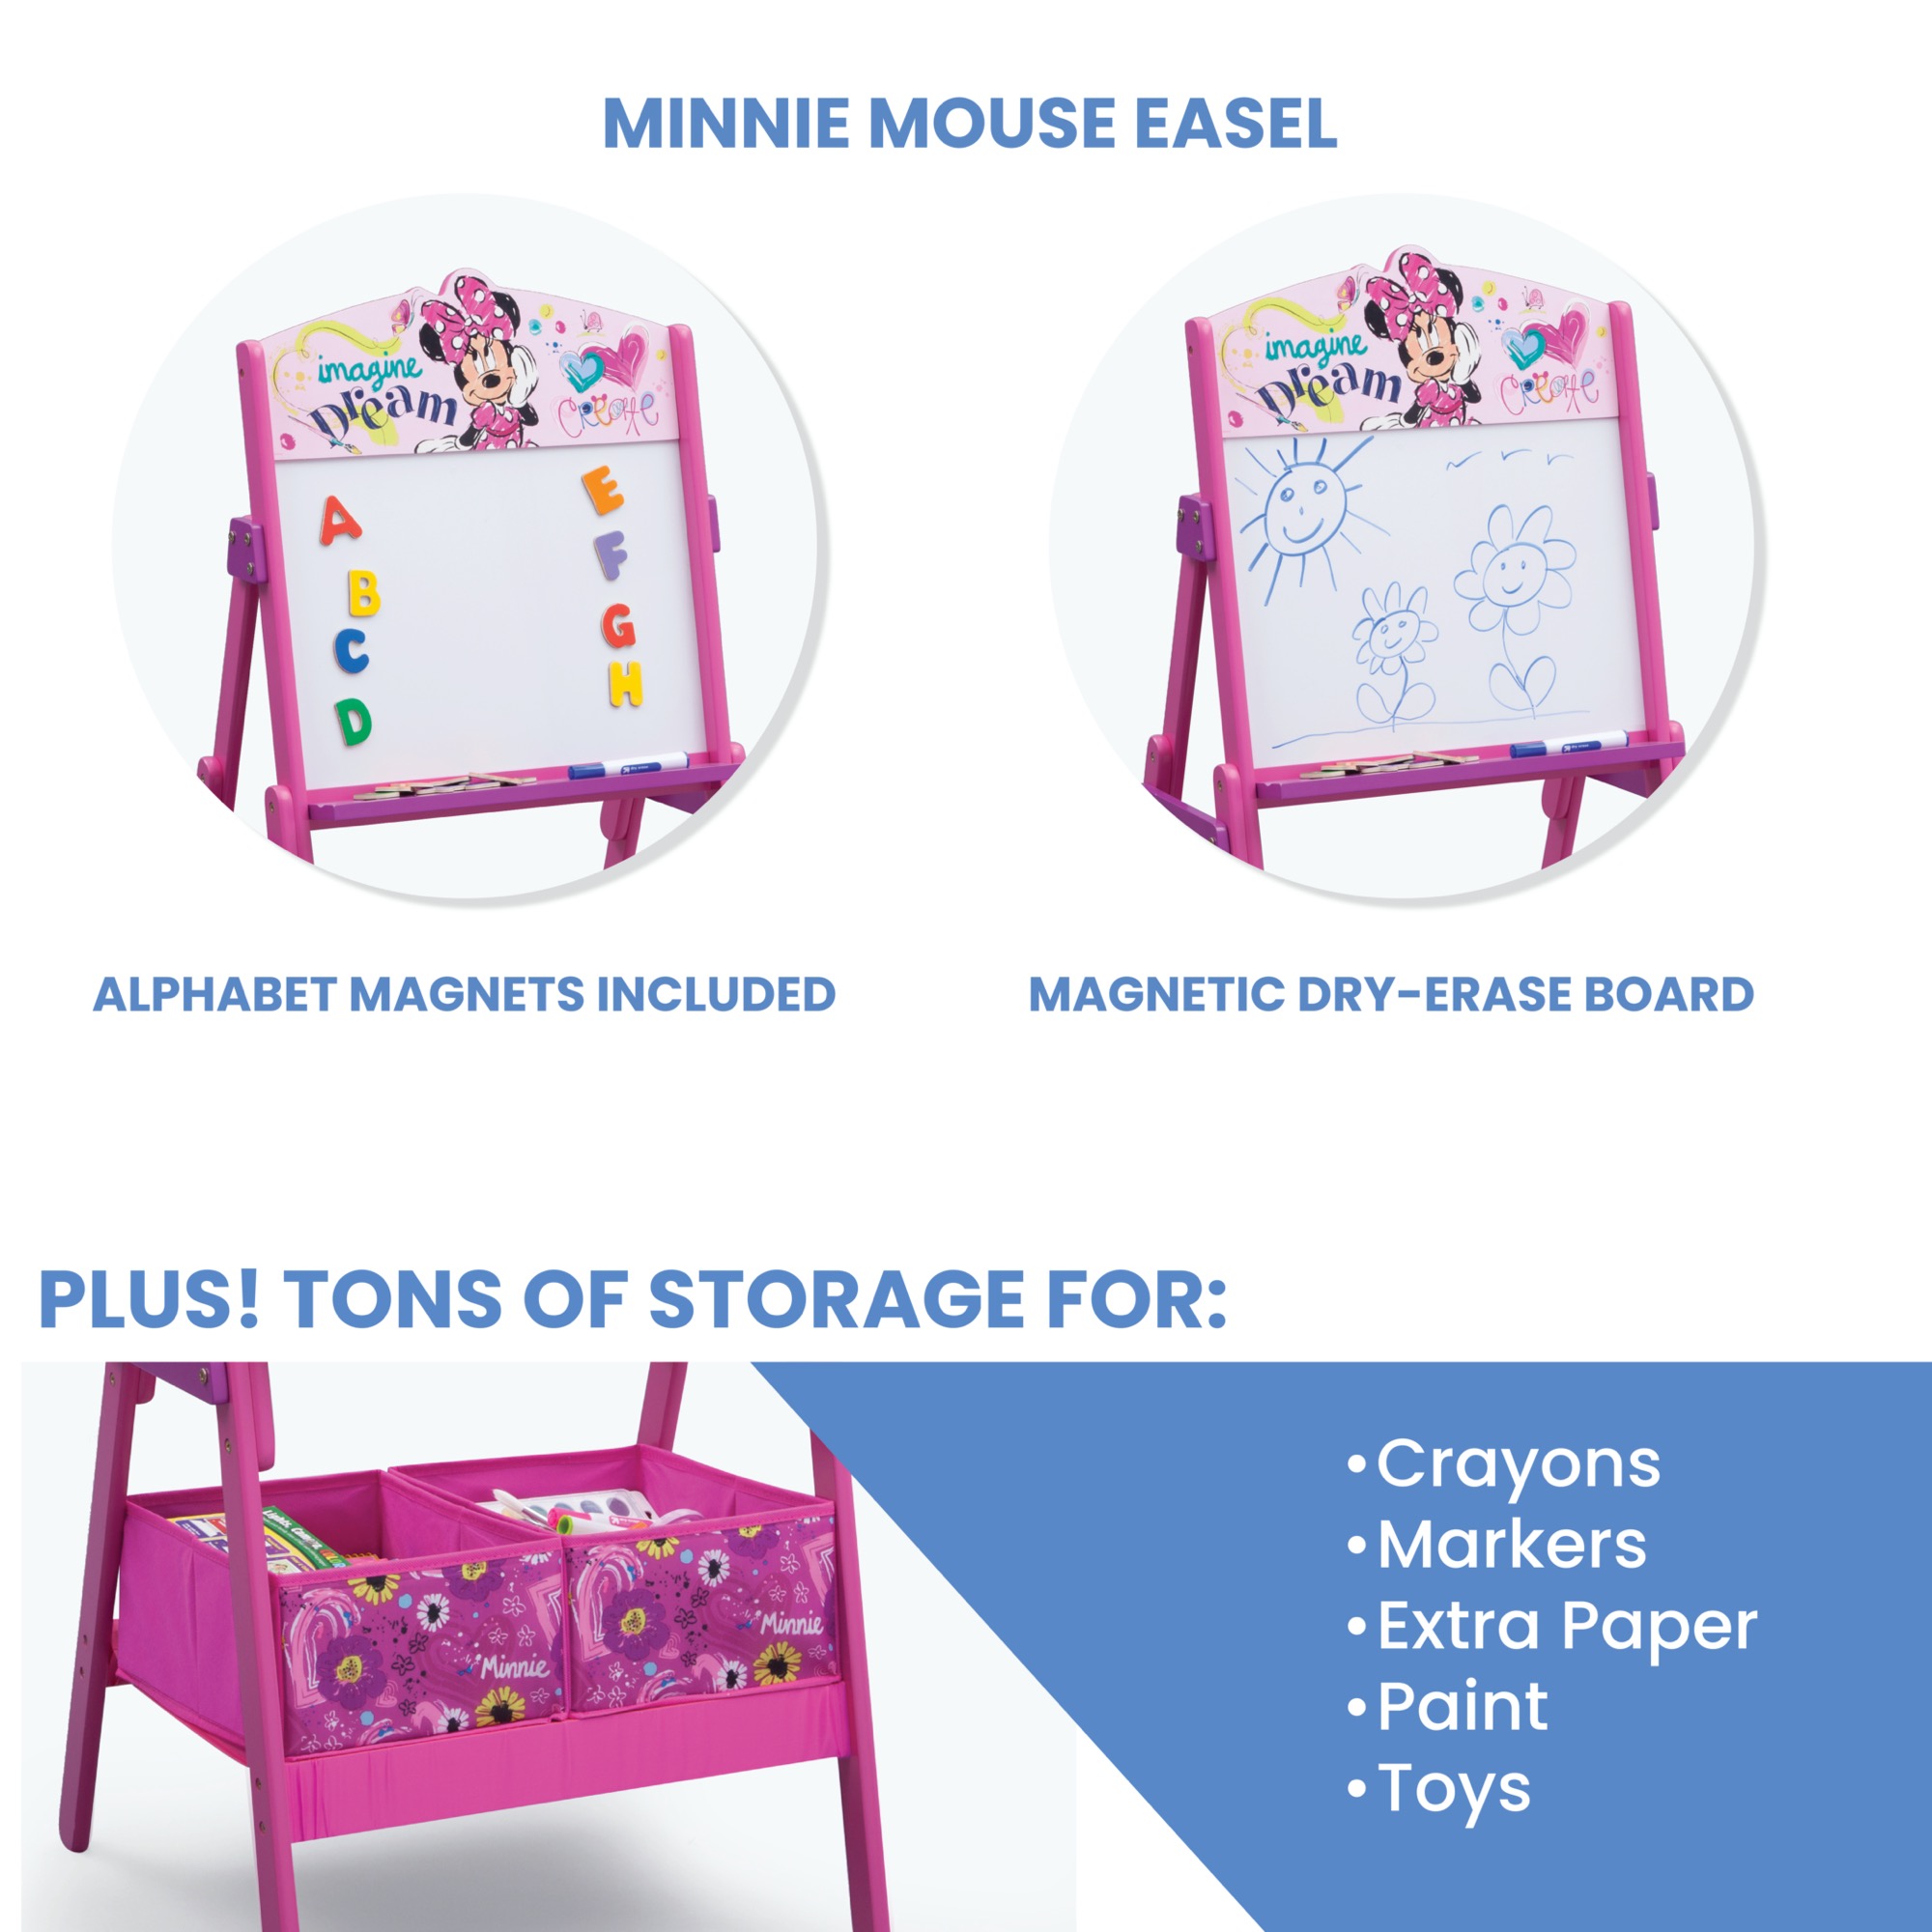 Disney Minnie Mouse Activity Easel with Storage by Delta Children, Greenguard Gold Certified - image 5 of 8